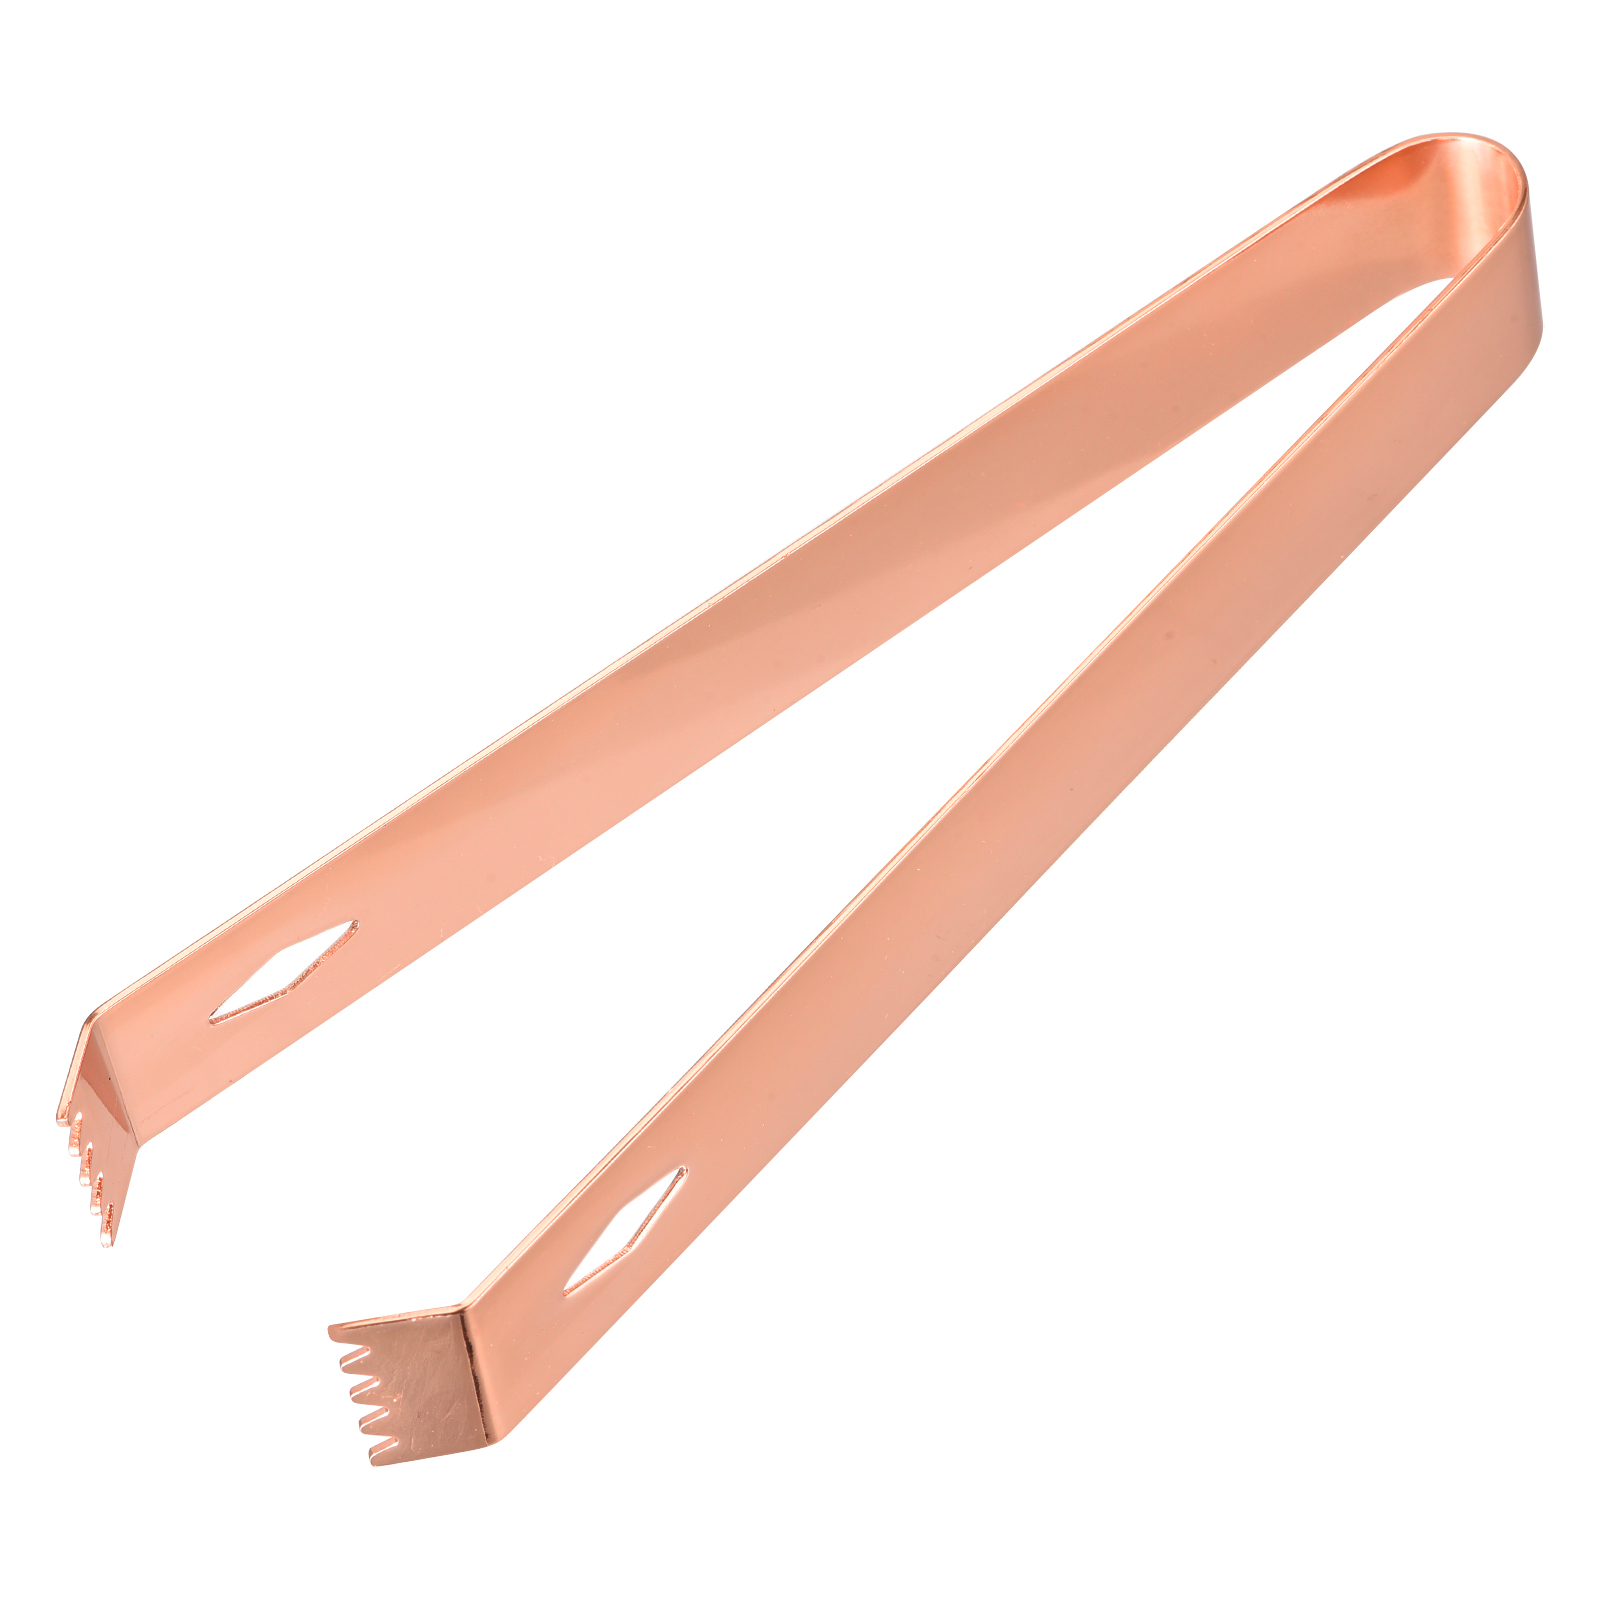 Unique Bargains Stainless Steel Ice Bucket Tongs Serving Bar Tongs for Ice Cube Sugar, Rose Gold